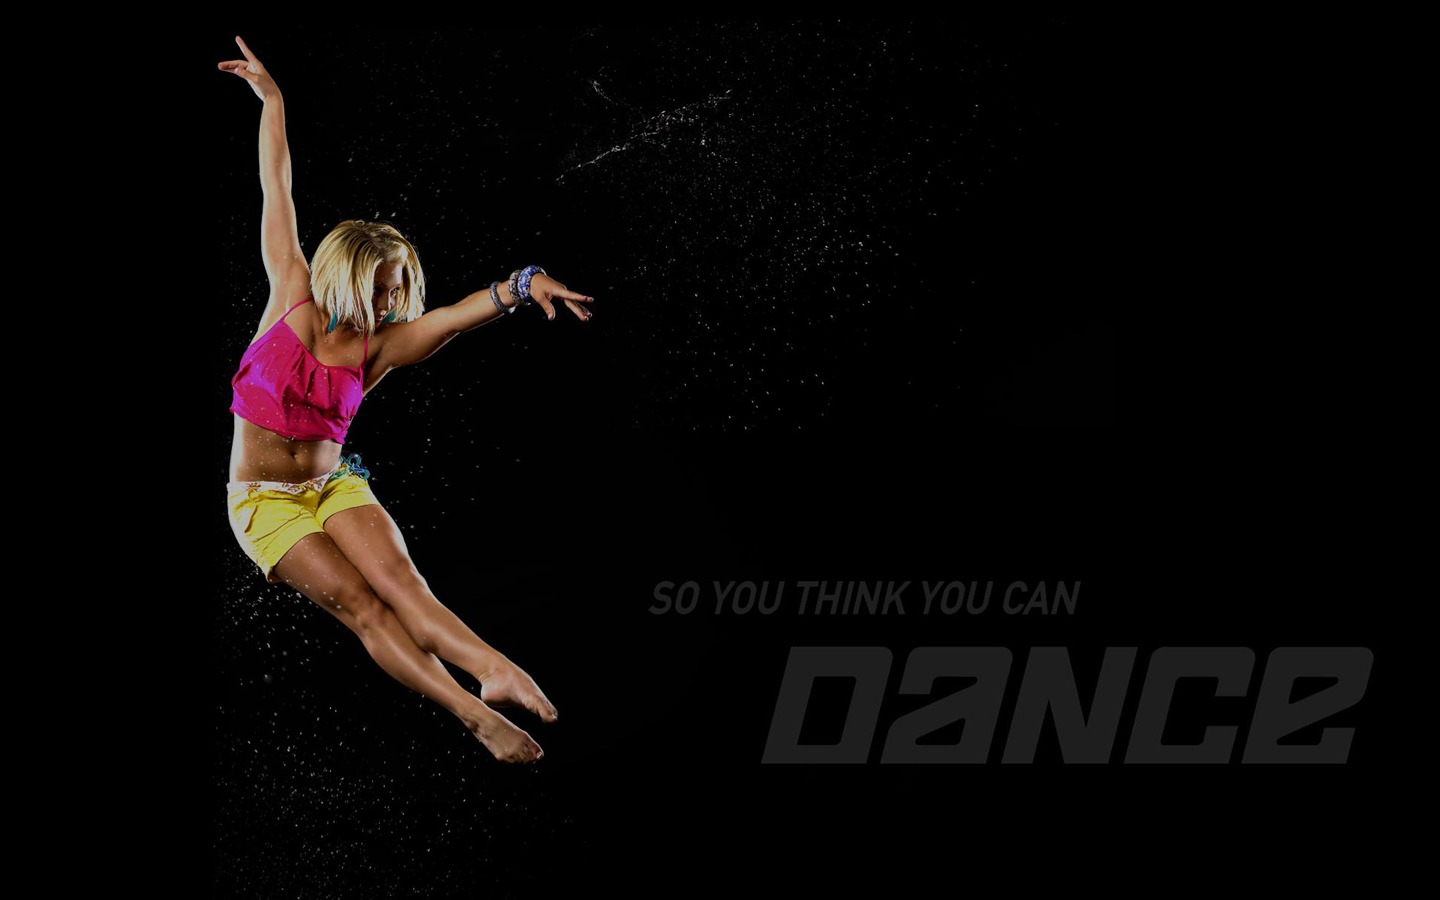 So You Think You Can Dance 舞林争霸 壁纸(一)5 - 1440x900